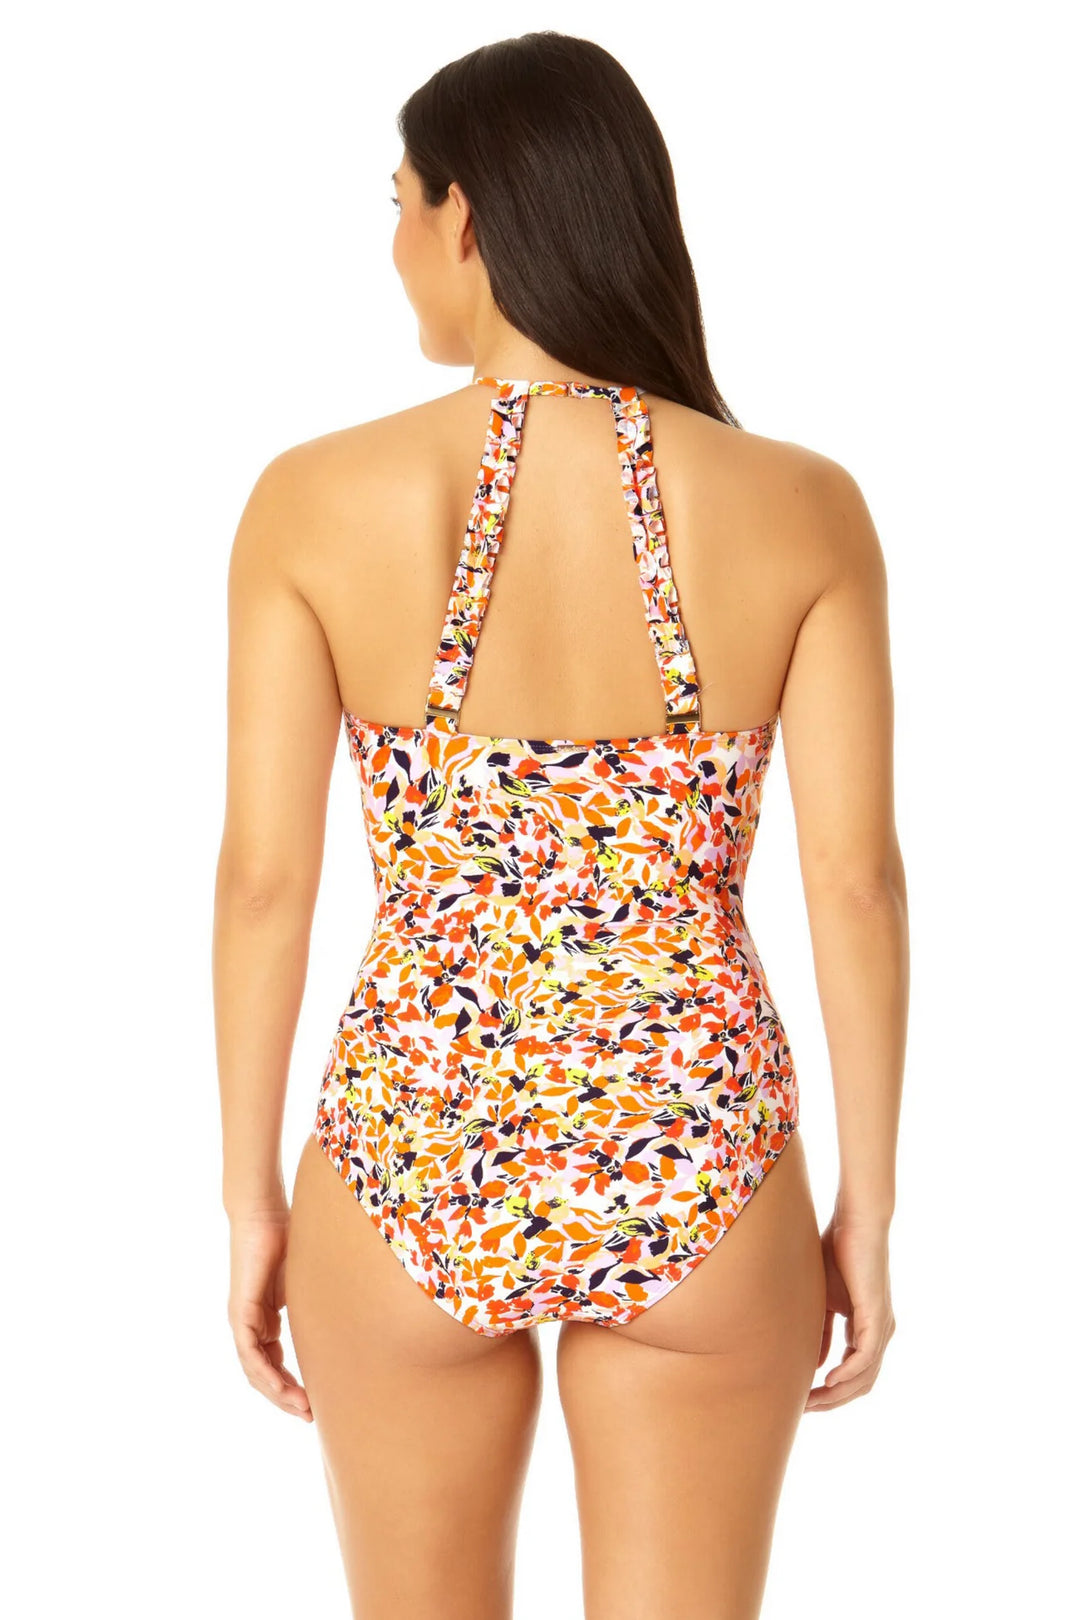 High Neck w/ Ruffled Straps One Piece - Whirlpool Ditsy